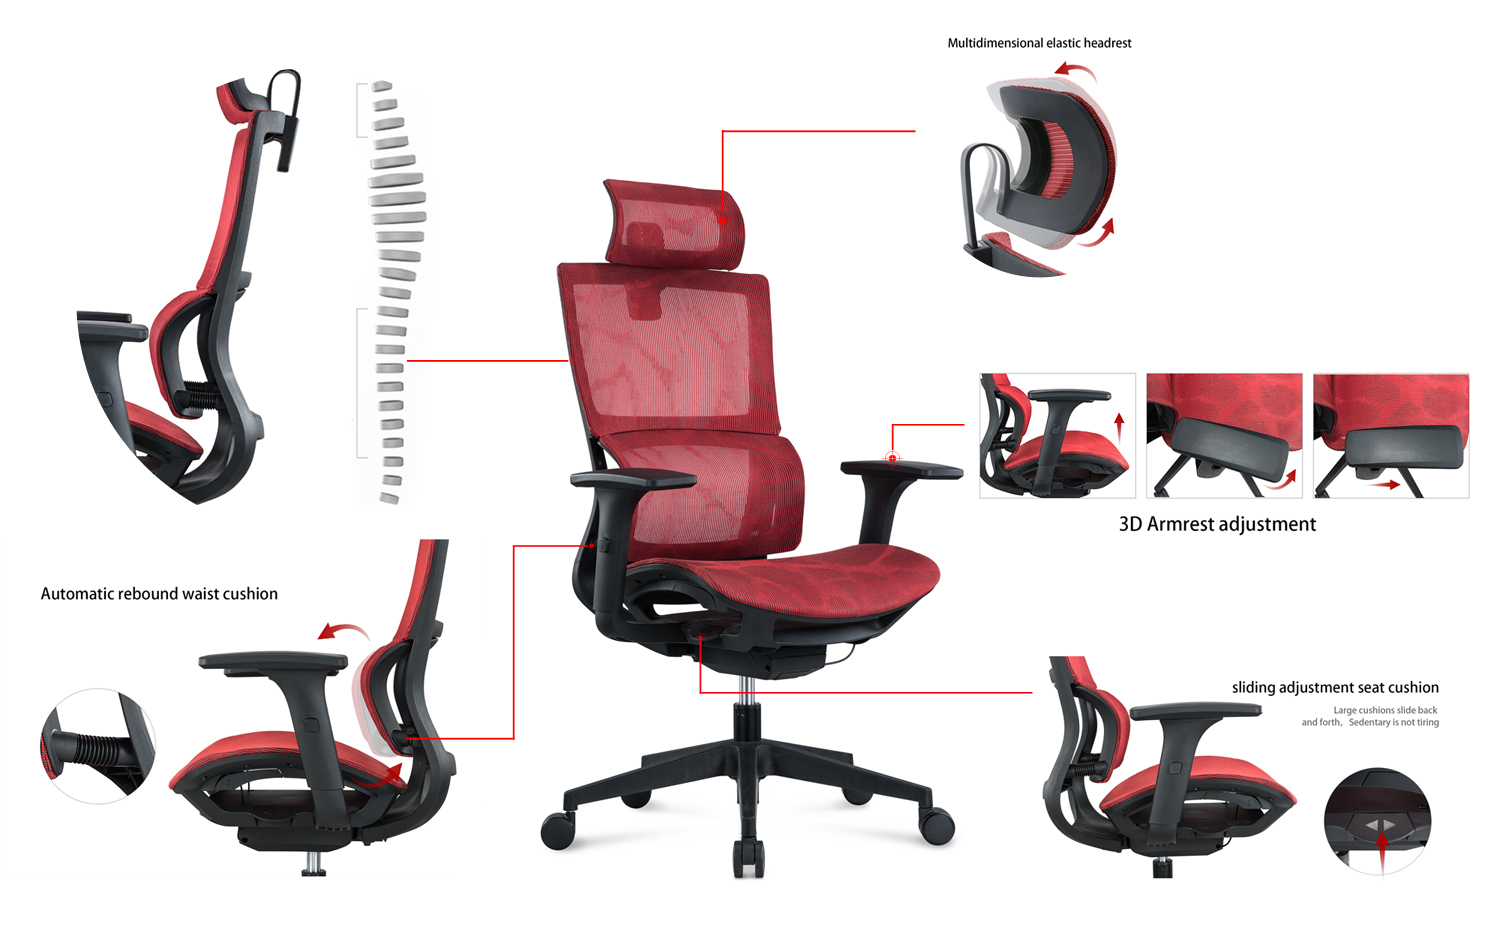 What Should I Consider When Buying an Ergonomic Chair?